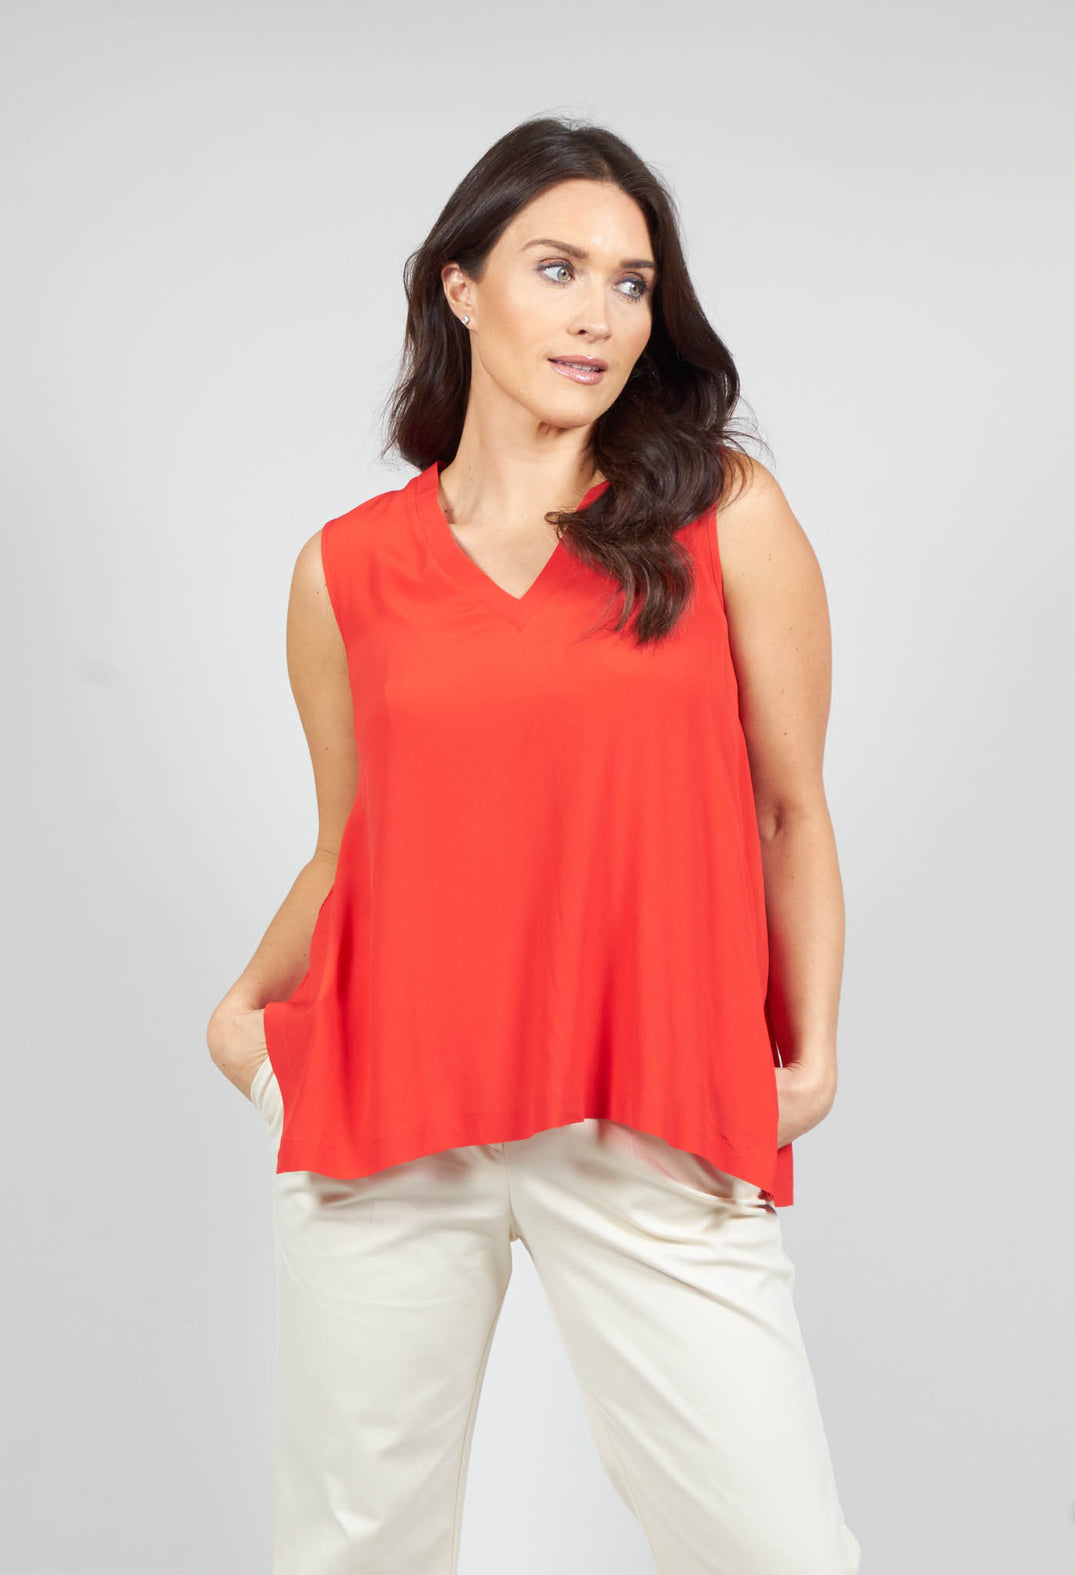 lady wearing a sleeveless red v neck loose fit top